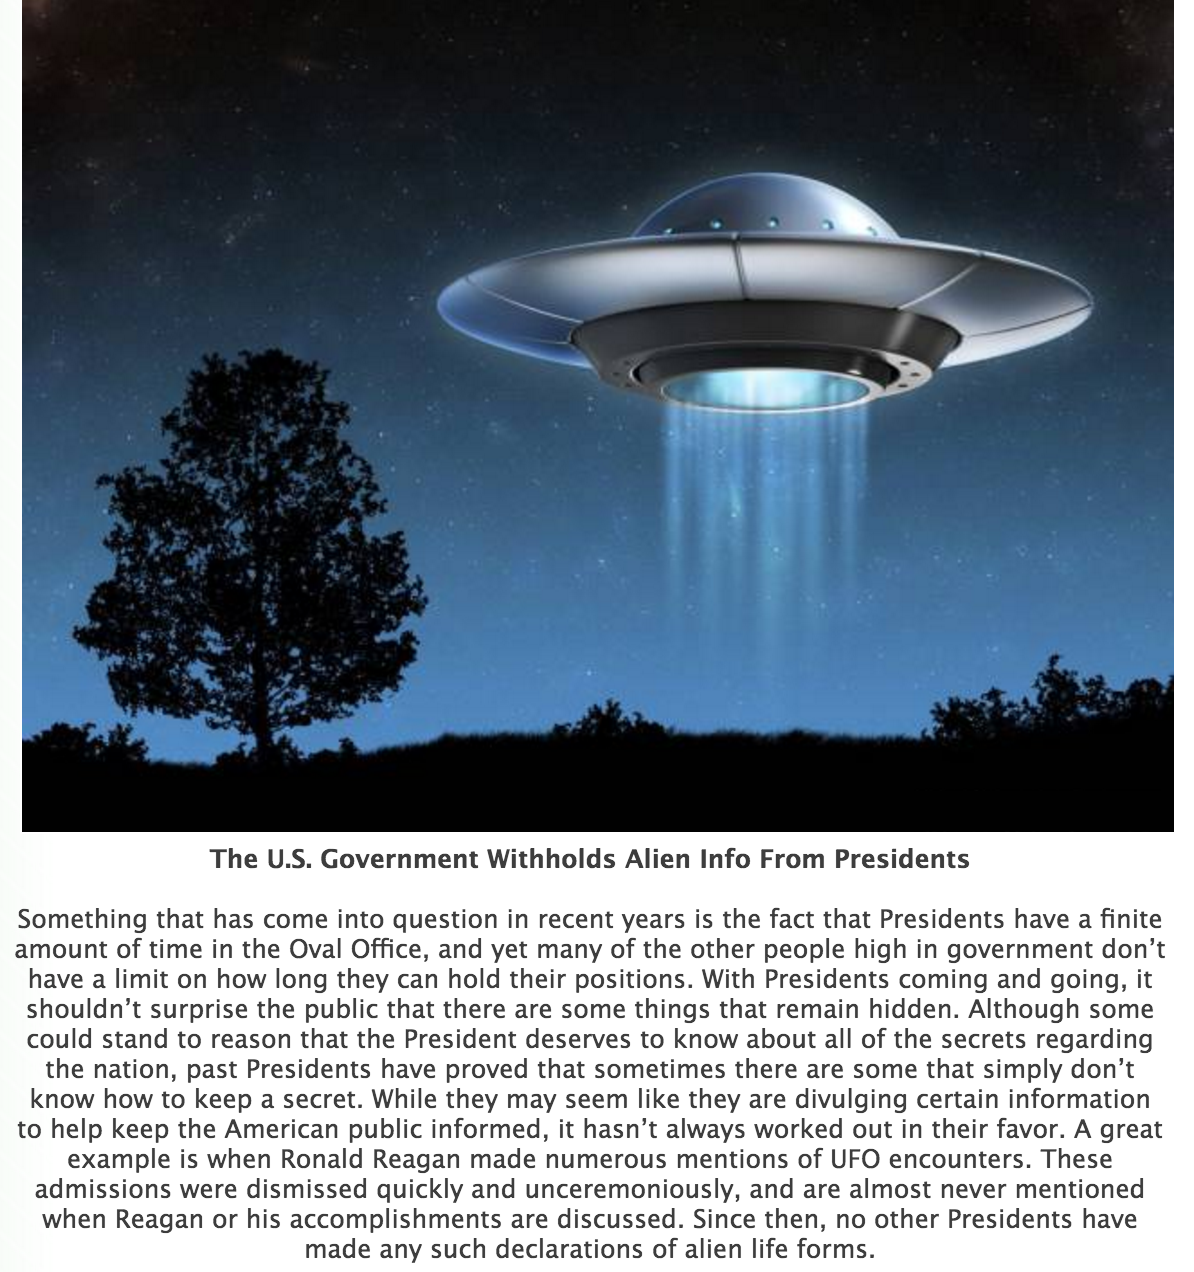 big ufo - The U.S. Government Withholds Alien Info From Presidents Something that has come into question in recent years is the fact that Presidents have a finite amount of time in the Oval Office, and yet many of the other people high in government don't